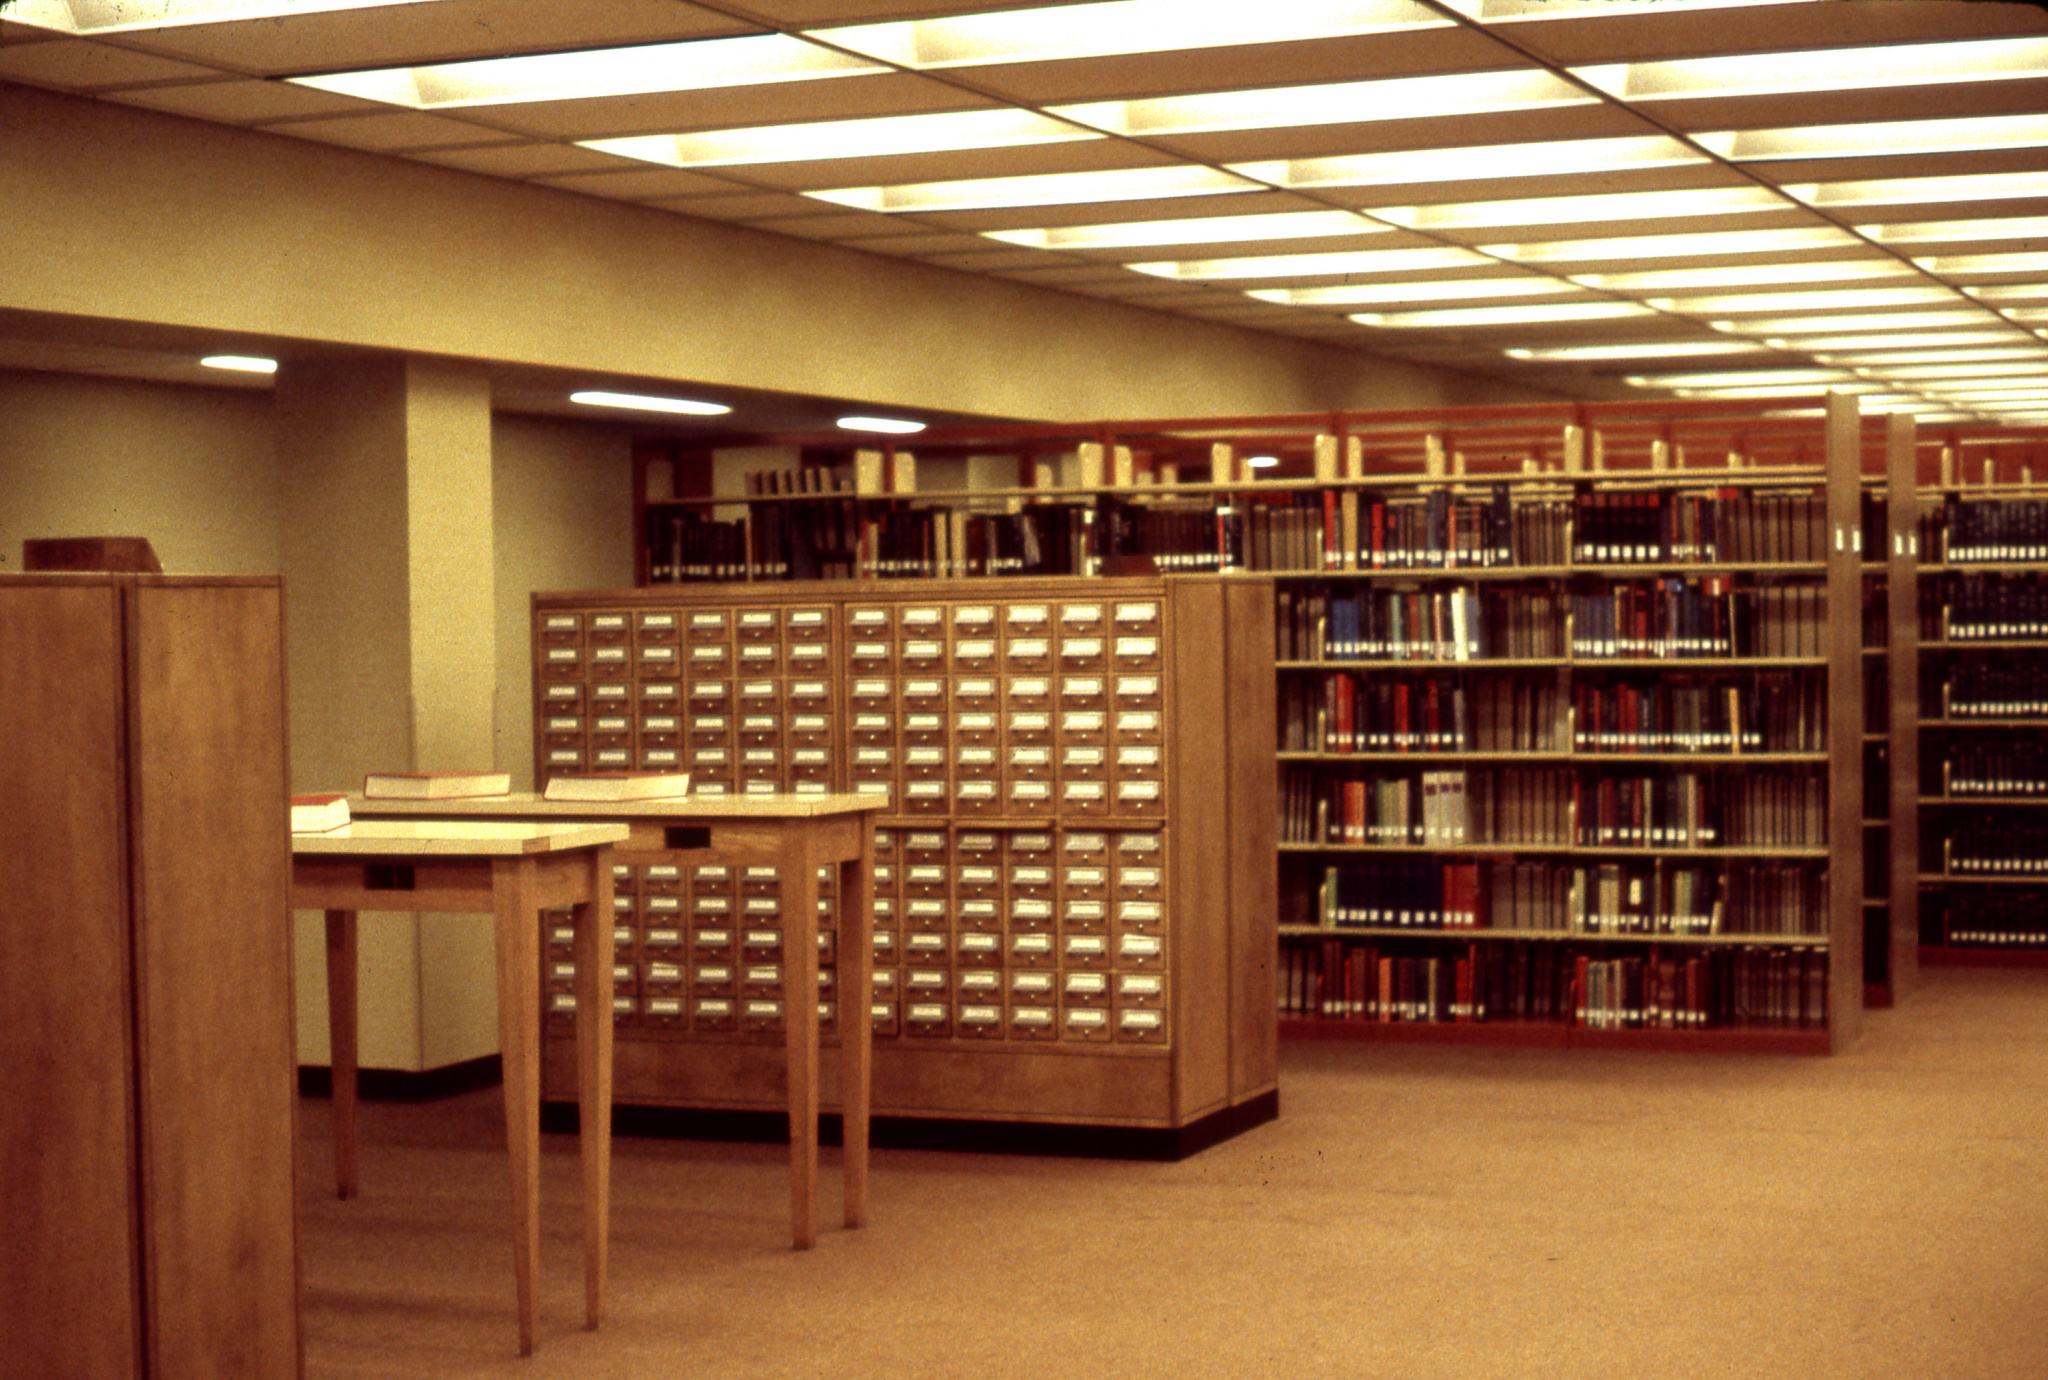 The card catalog in its new location after the library was expanded in 1980